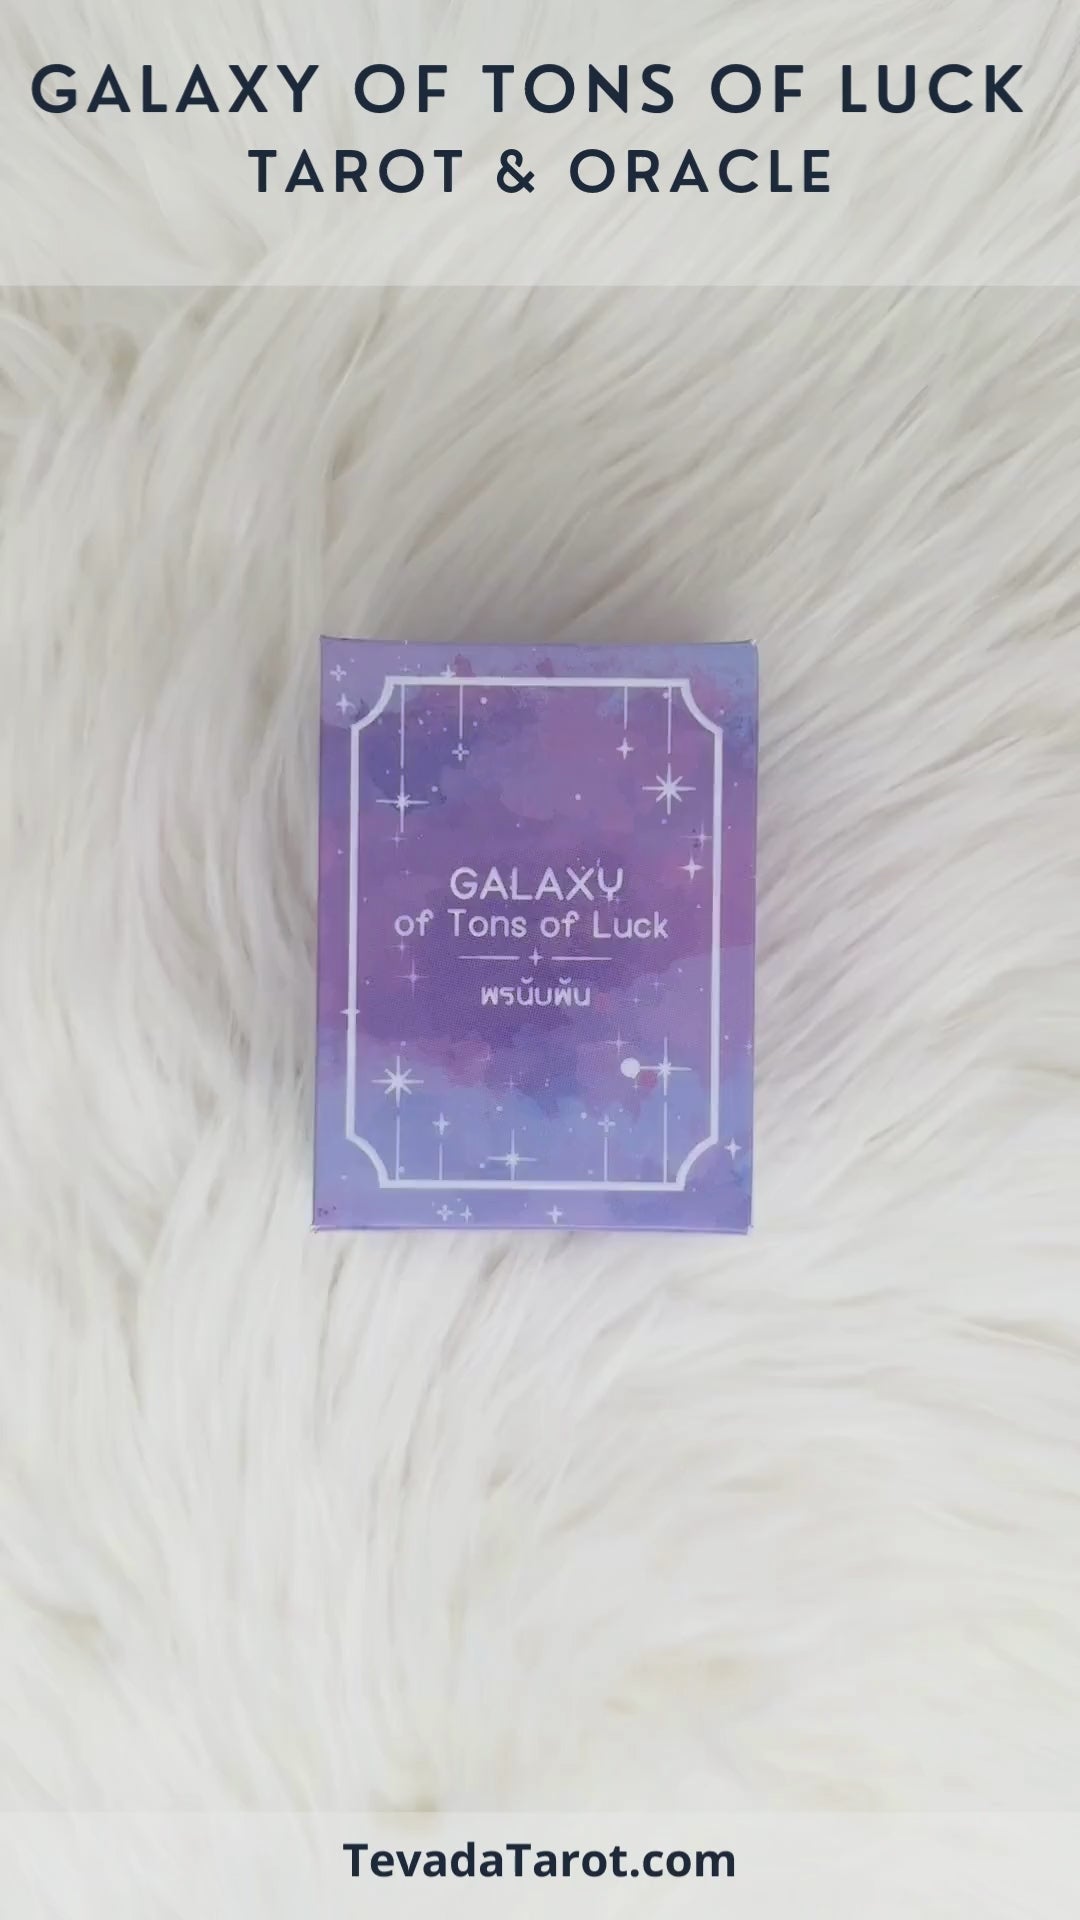 Galaxy of Tons of Luck Tarot & Oracle